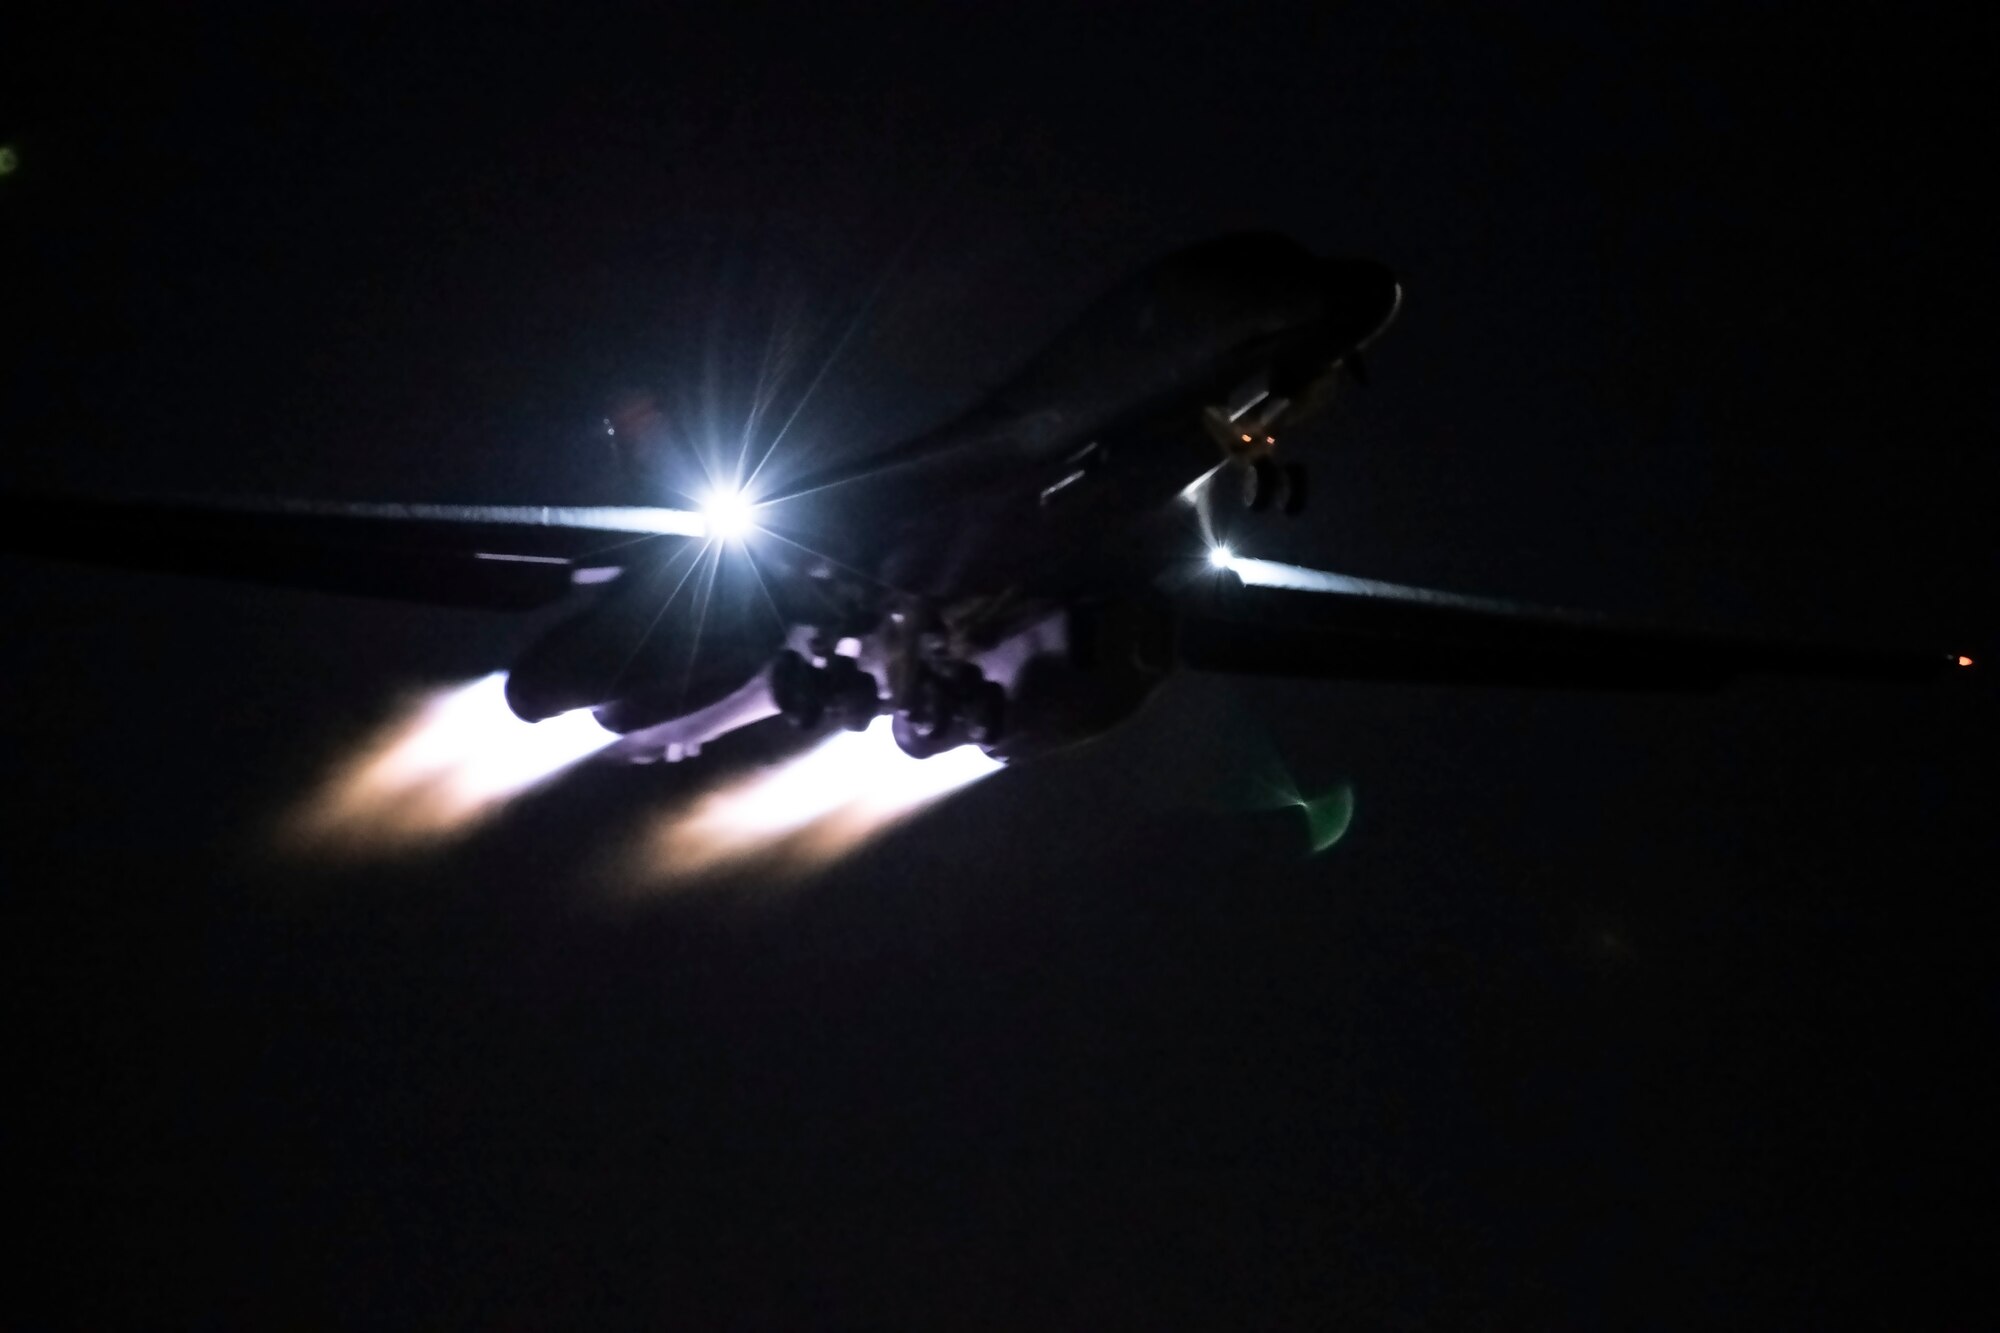 A B-1B Lancer soars through the night sky above Nellis Air Force Base, Nev., during Red Flag 20-1, Jan. 30, 2020. Flight surgeons help to make the mission possible by ensuring that aviators are fit to fly prior to takeoff. (U.S. Air Force photo by Airman 1st Class Christina Bennett)